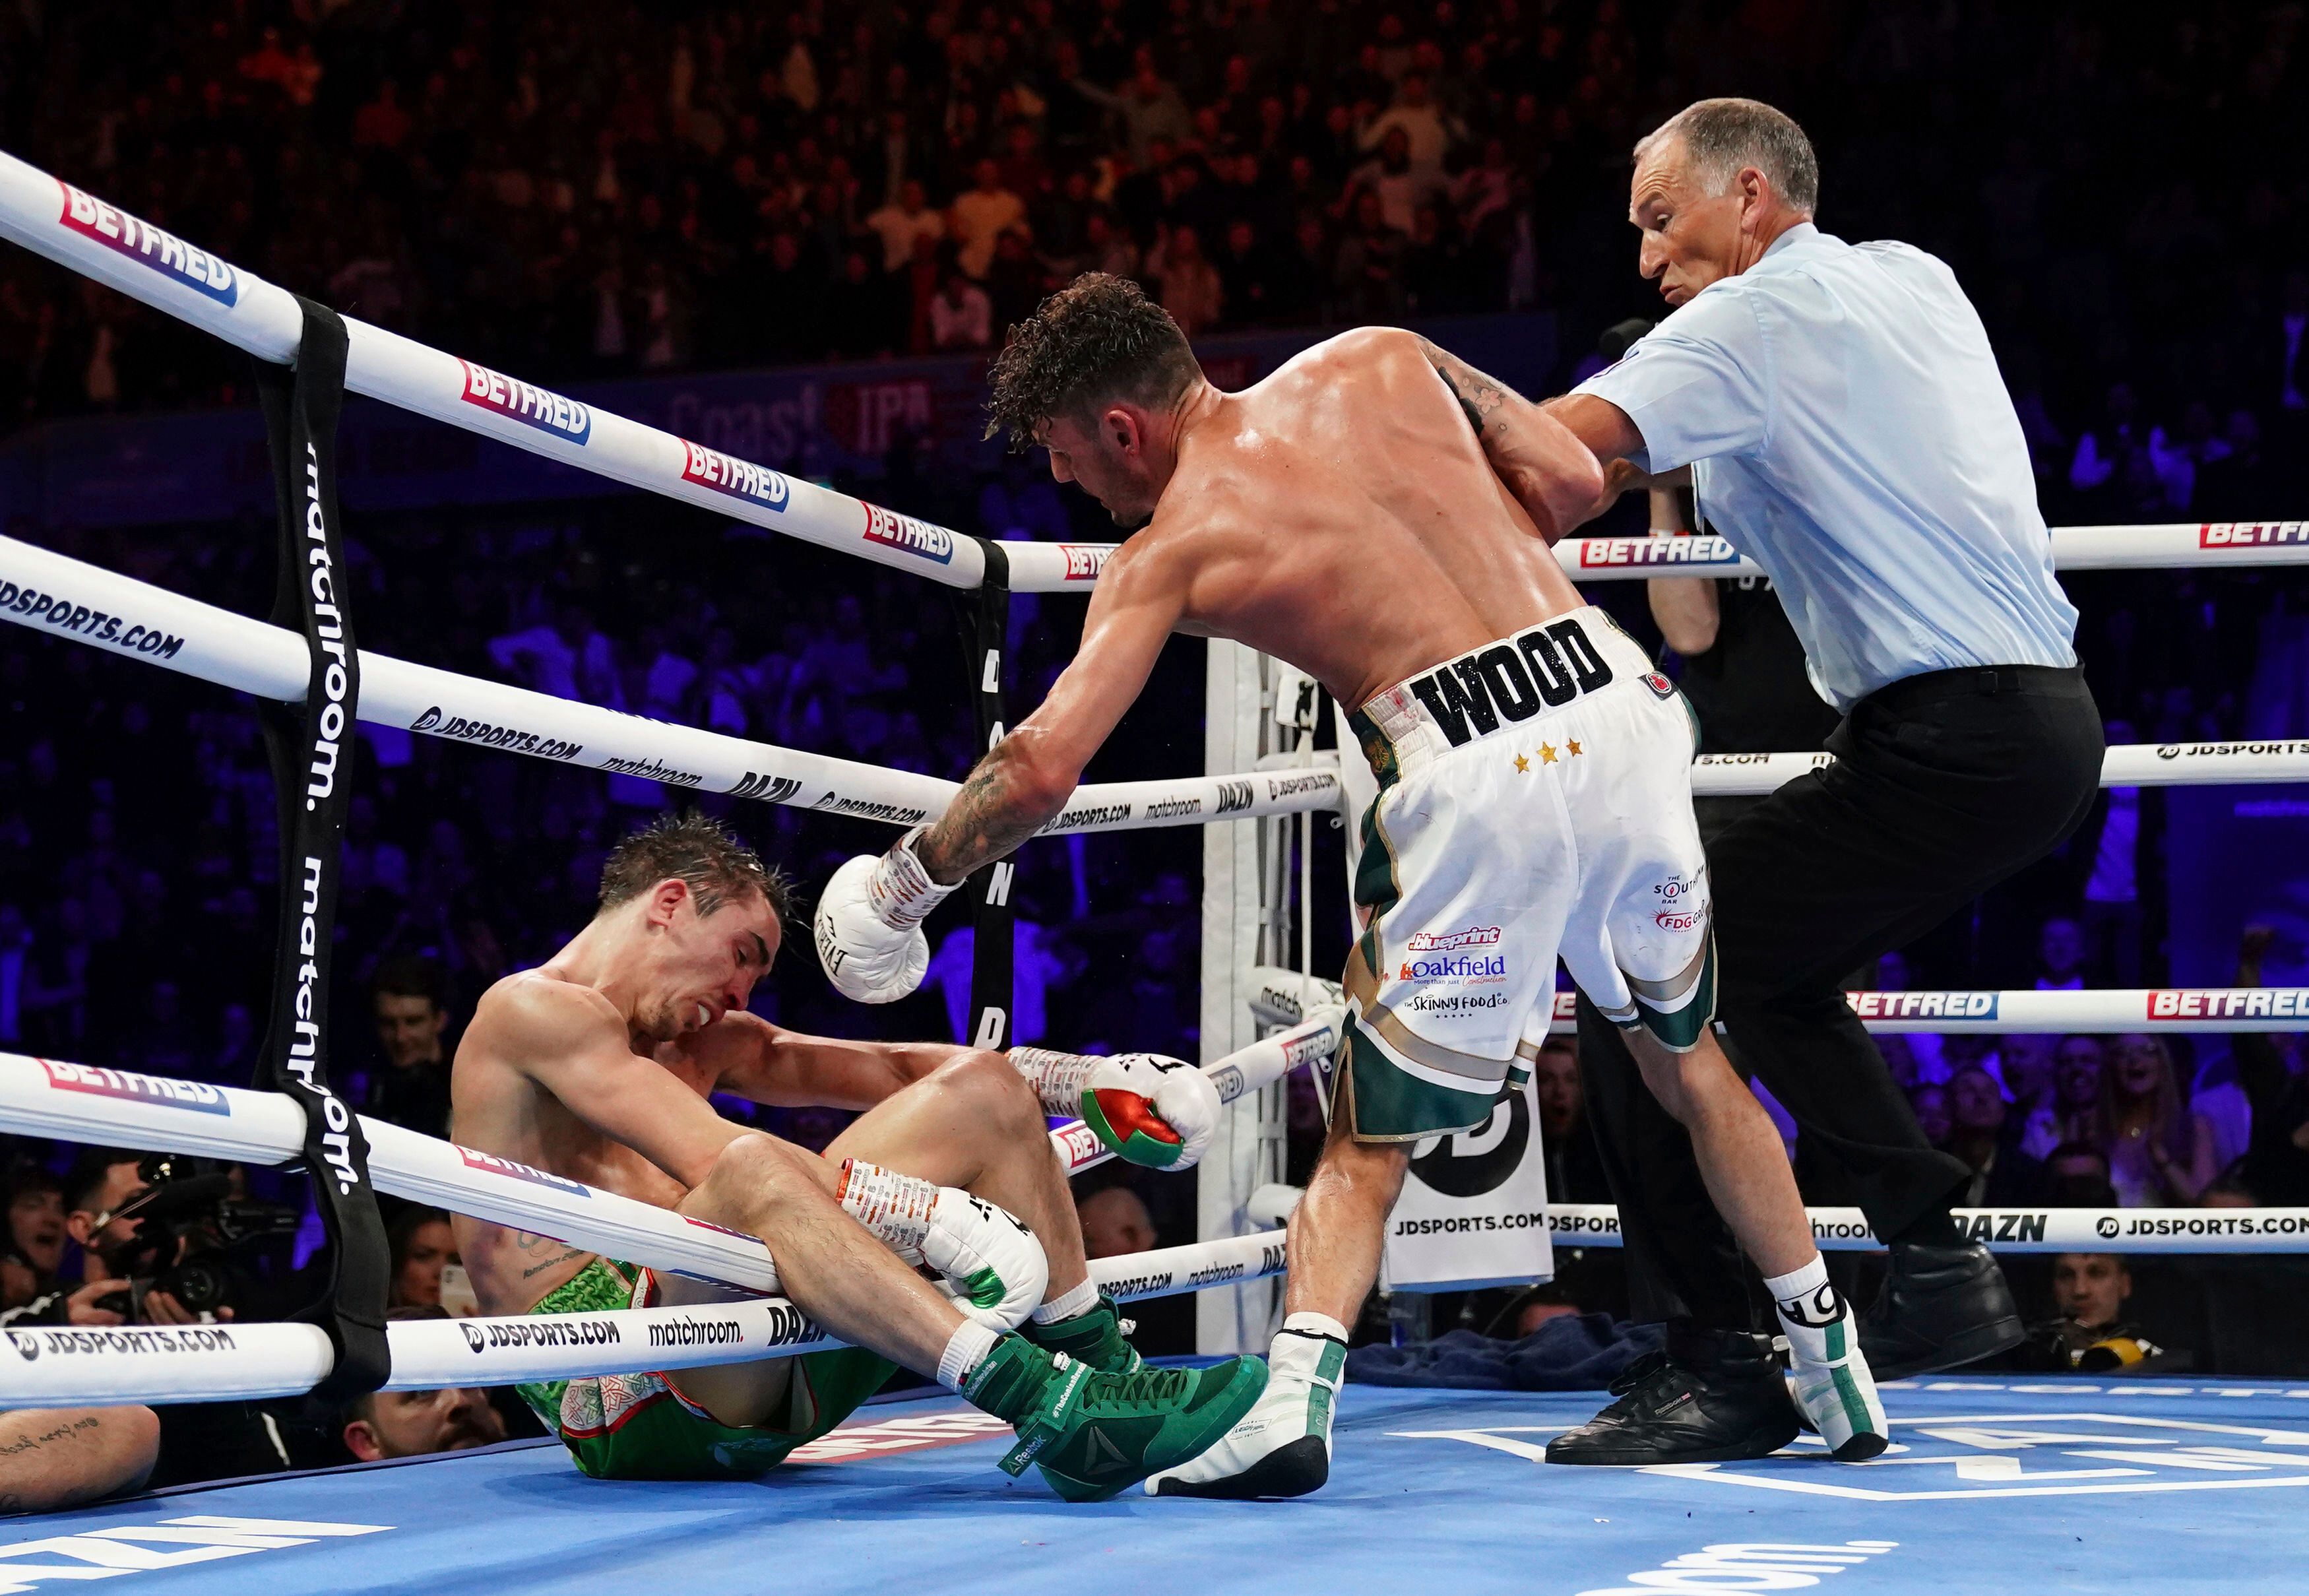 Boxer Michael Conlan OK after being knocked out of ring The Seattle Times